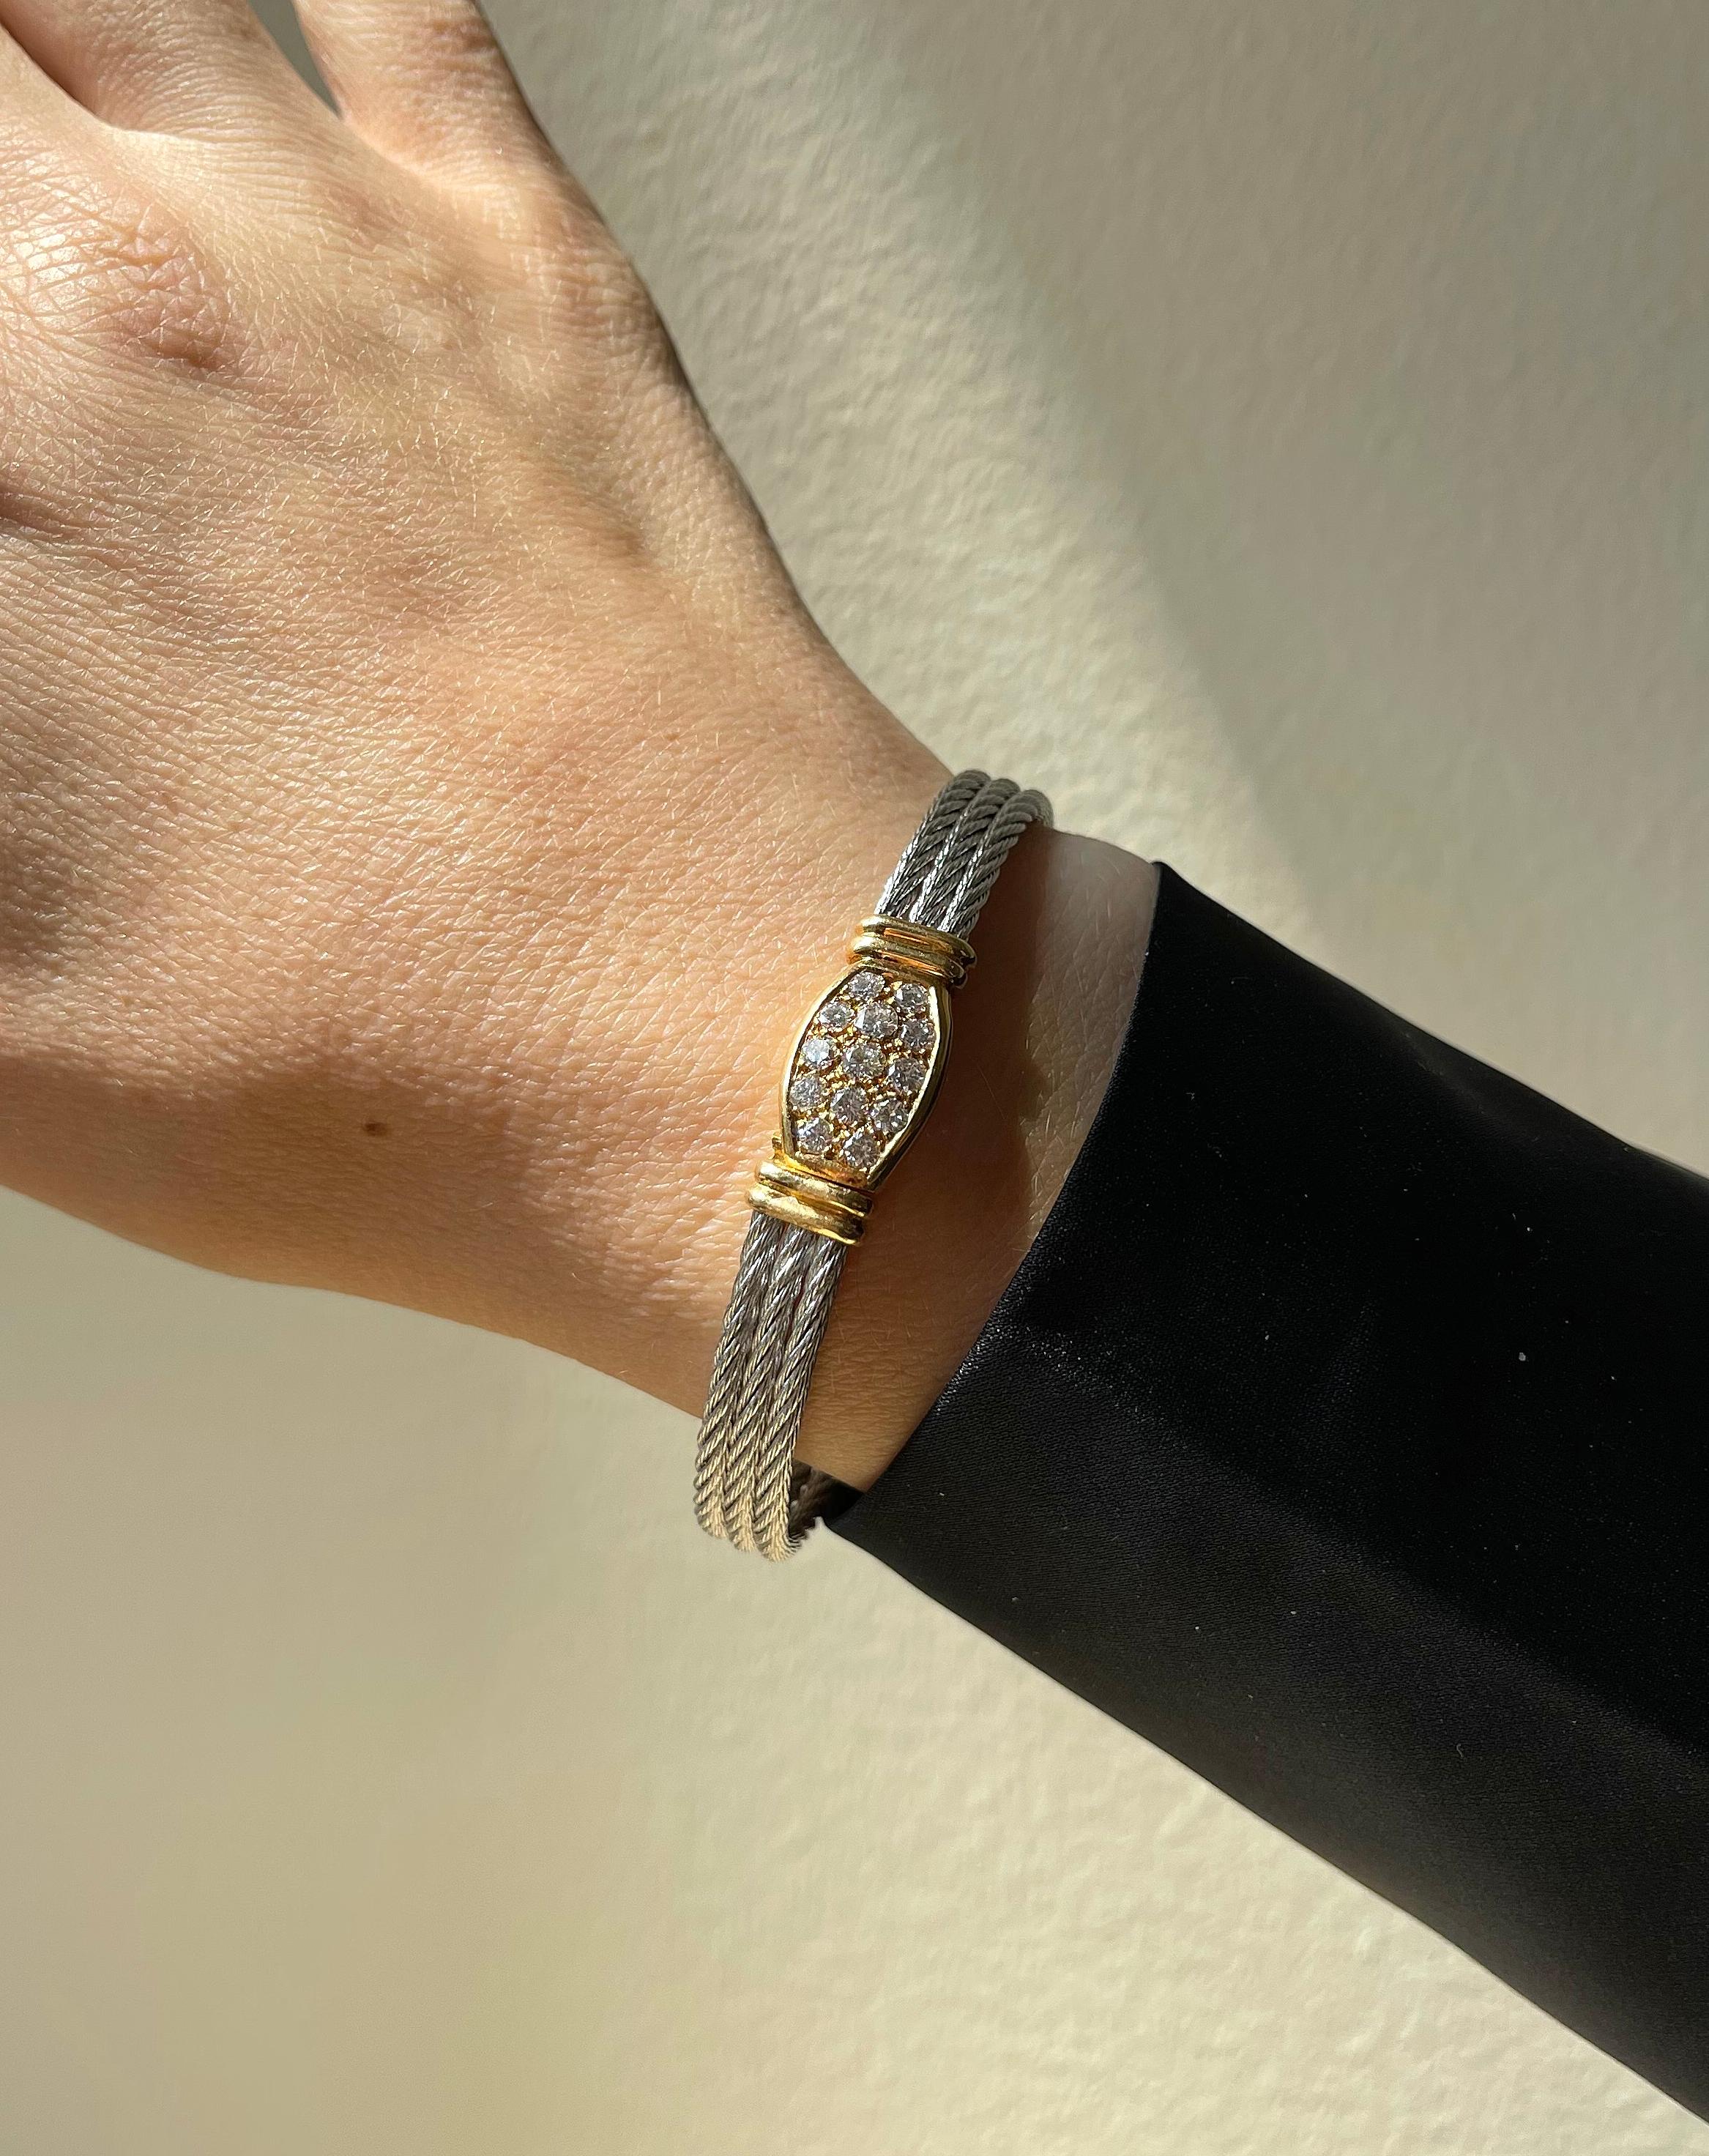 18k gold and stainless steel cord bracelet by Fred Paris, with approx. 0.95ctw G/VS diamonds. Bracelet will fit approx. 7